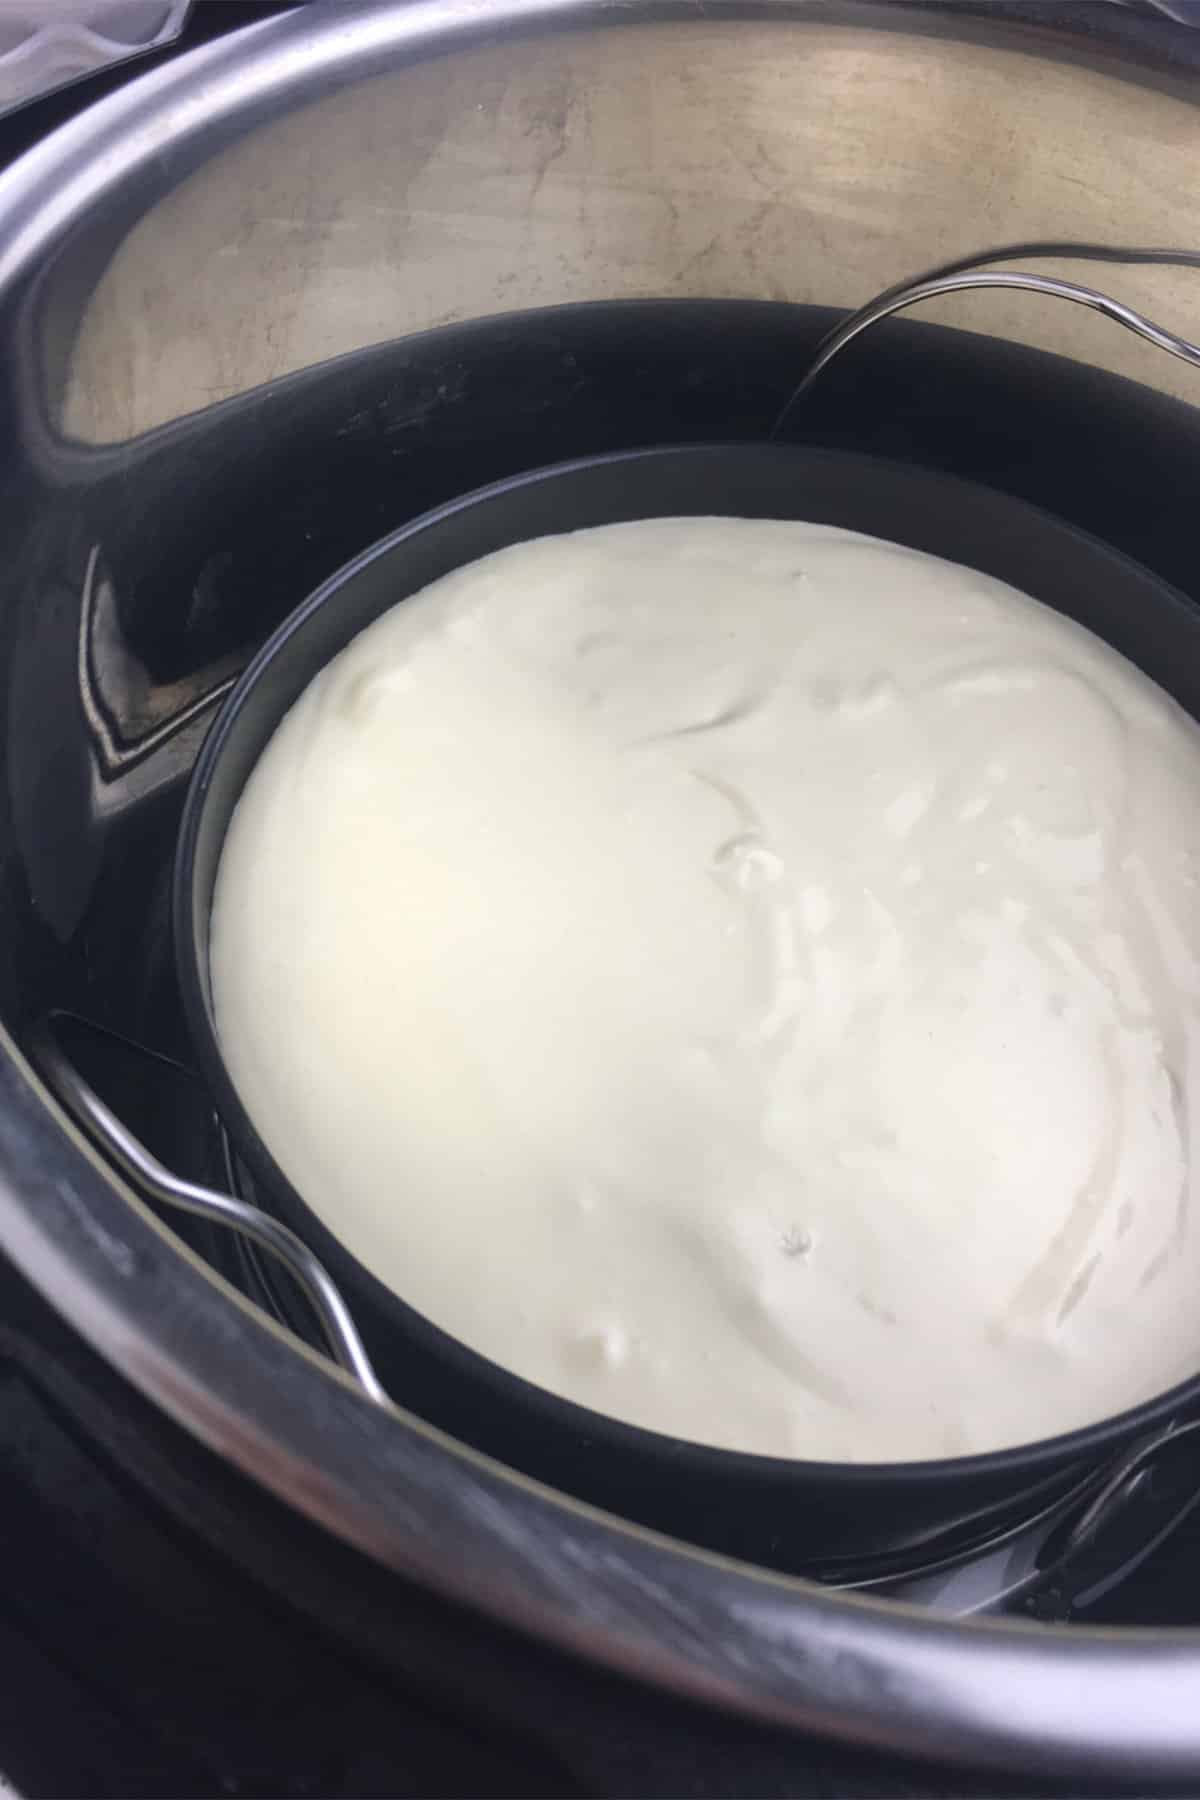 Small Instant pot springform pan filled with keto cheesecake batter, placed in an Instant Pot.